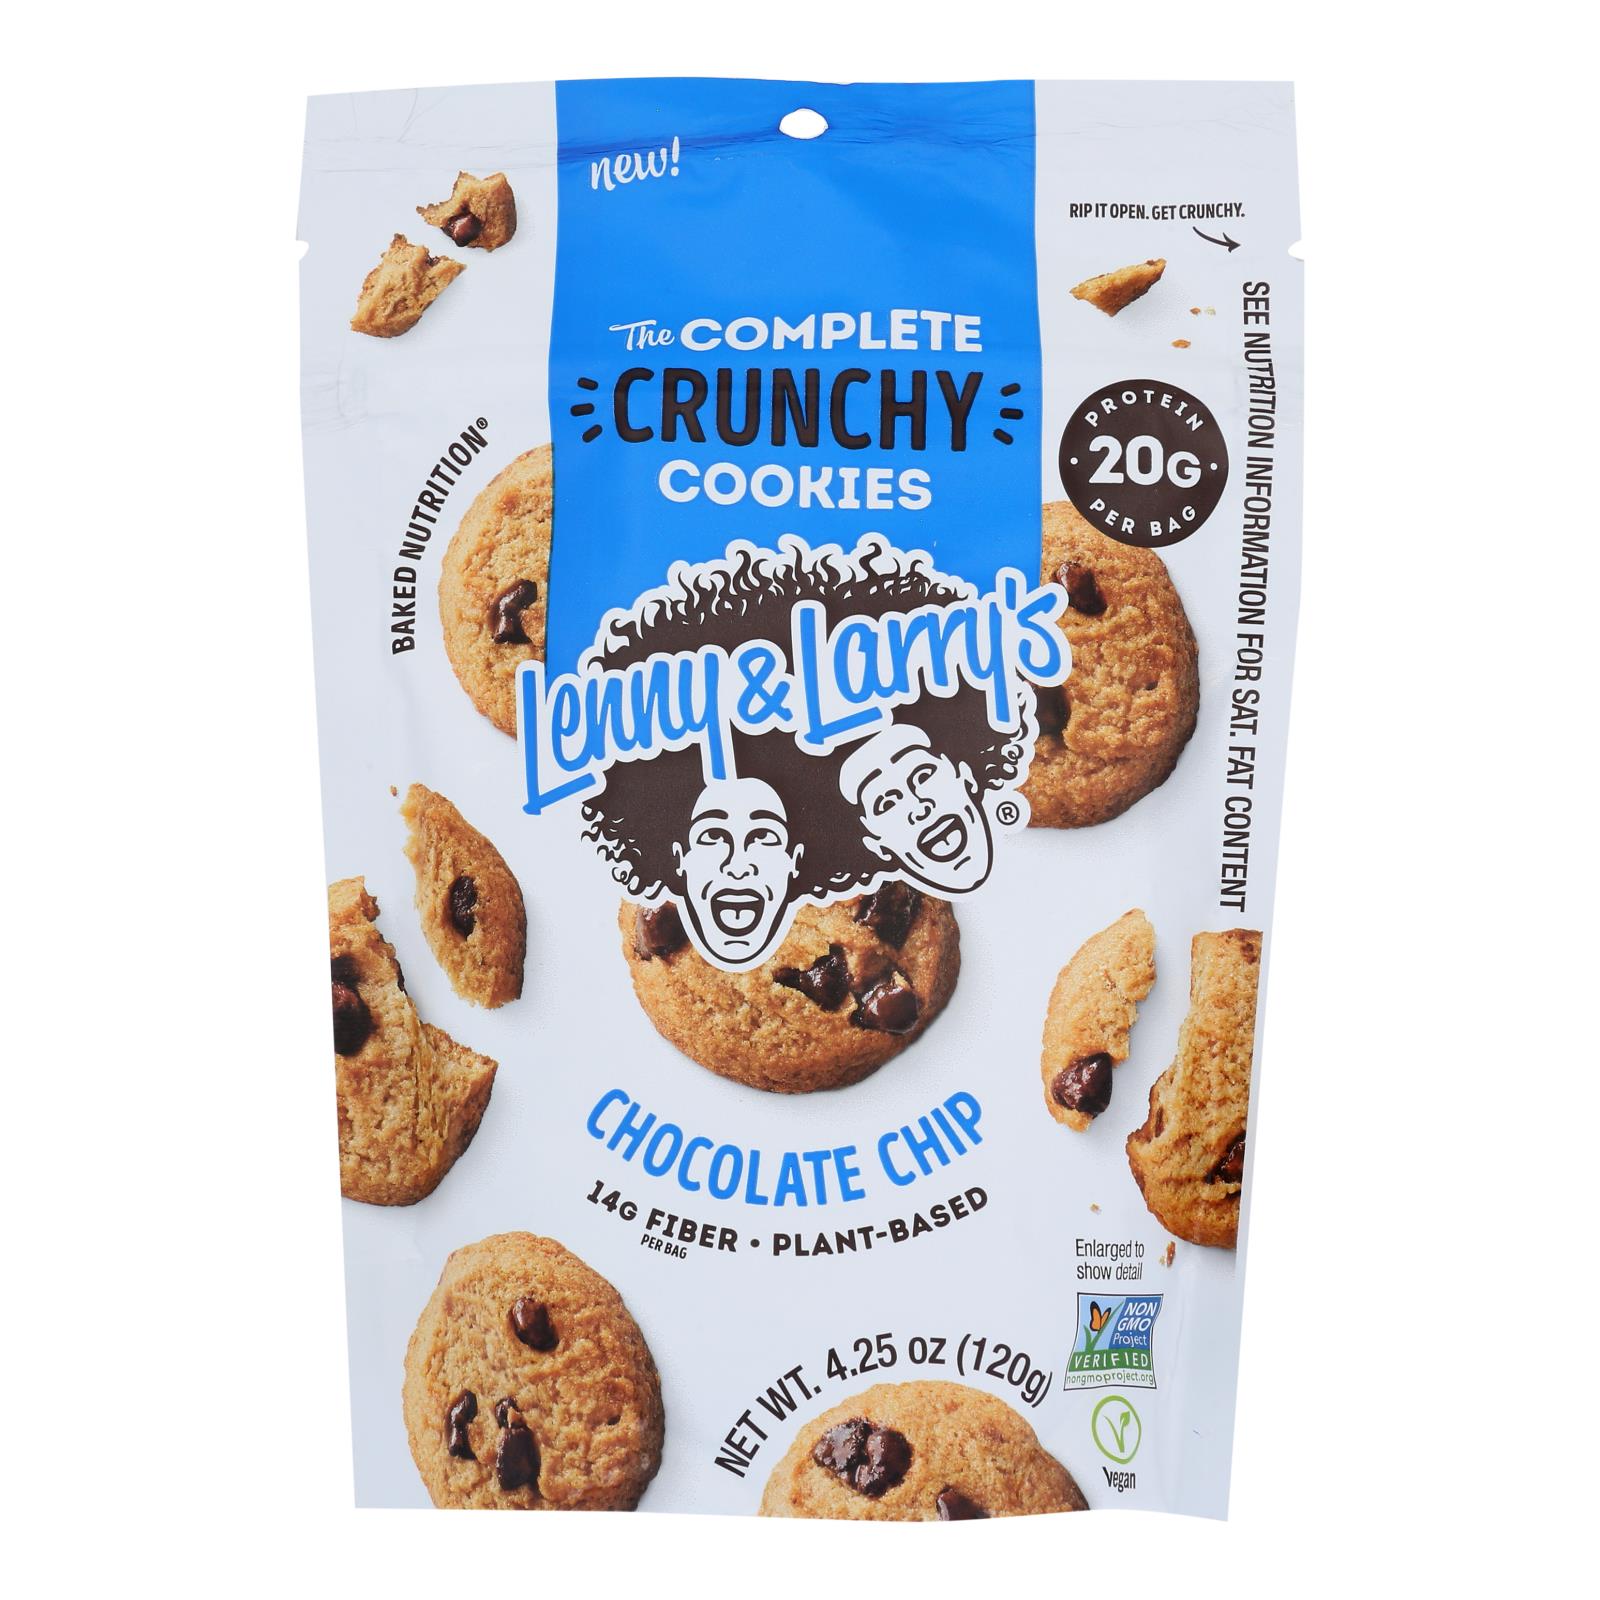 Lenny & Larry's® The Complete Crunchy Cookies - 6개 묶음상품 - 4.25 OZ